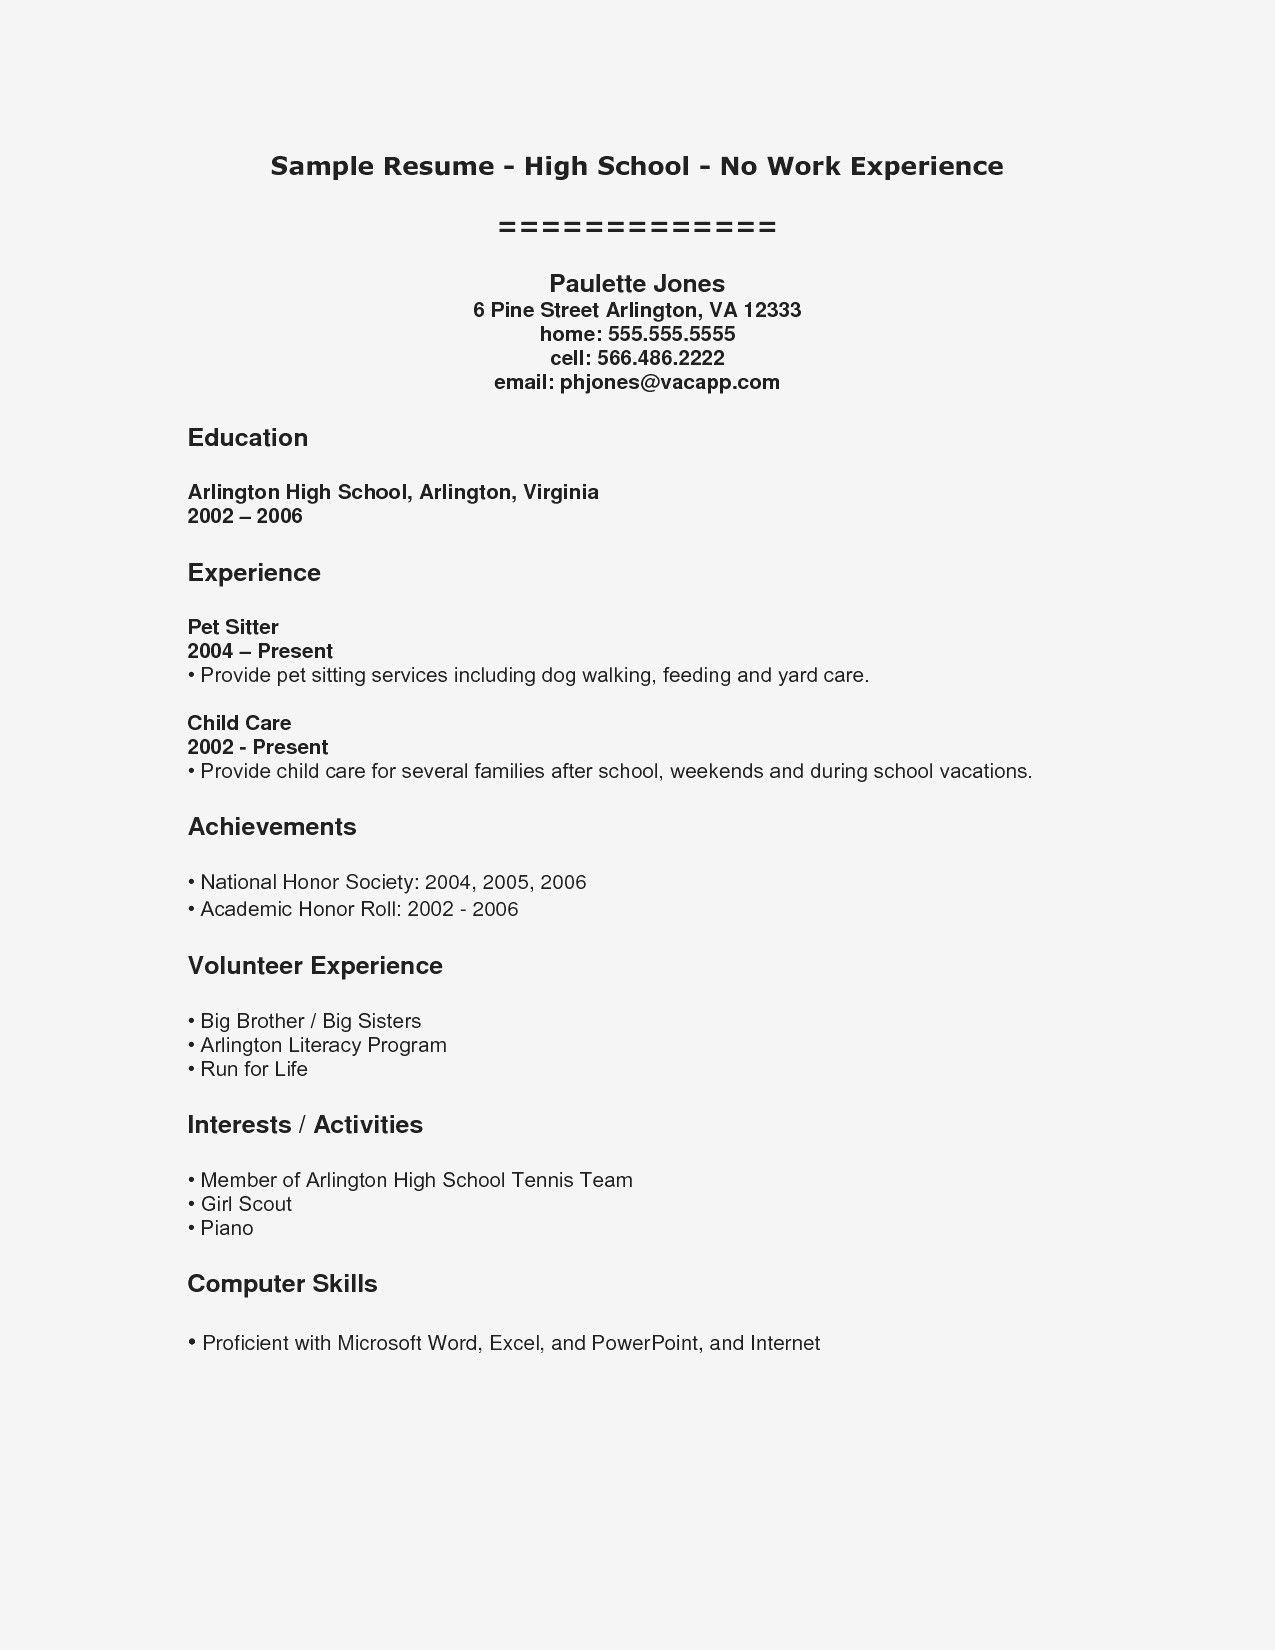 Resume Samples for High School Students with Work Experience Pin Page